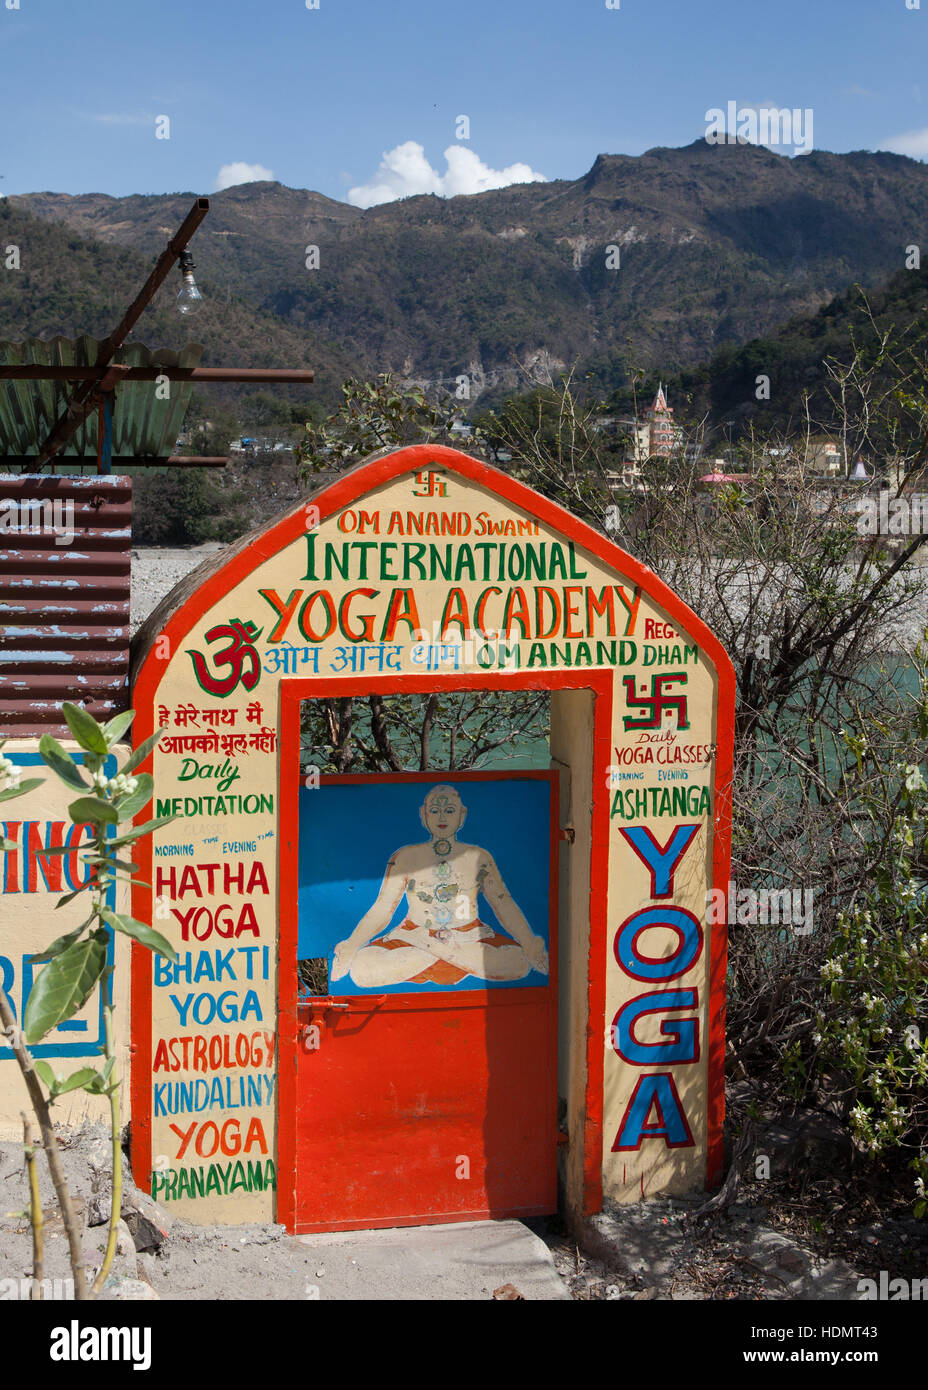 Entrance to the International Yoga Academy on the Ganges river in Rishikesh, India Stock Photo